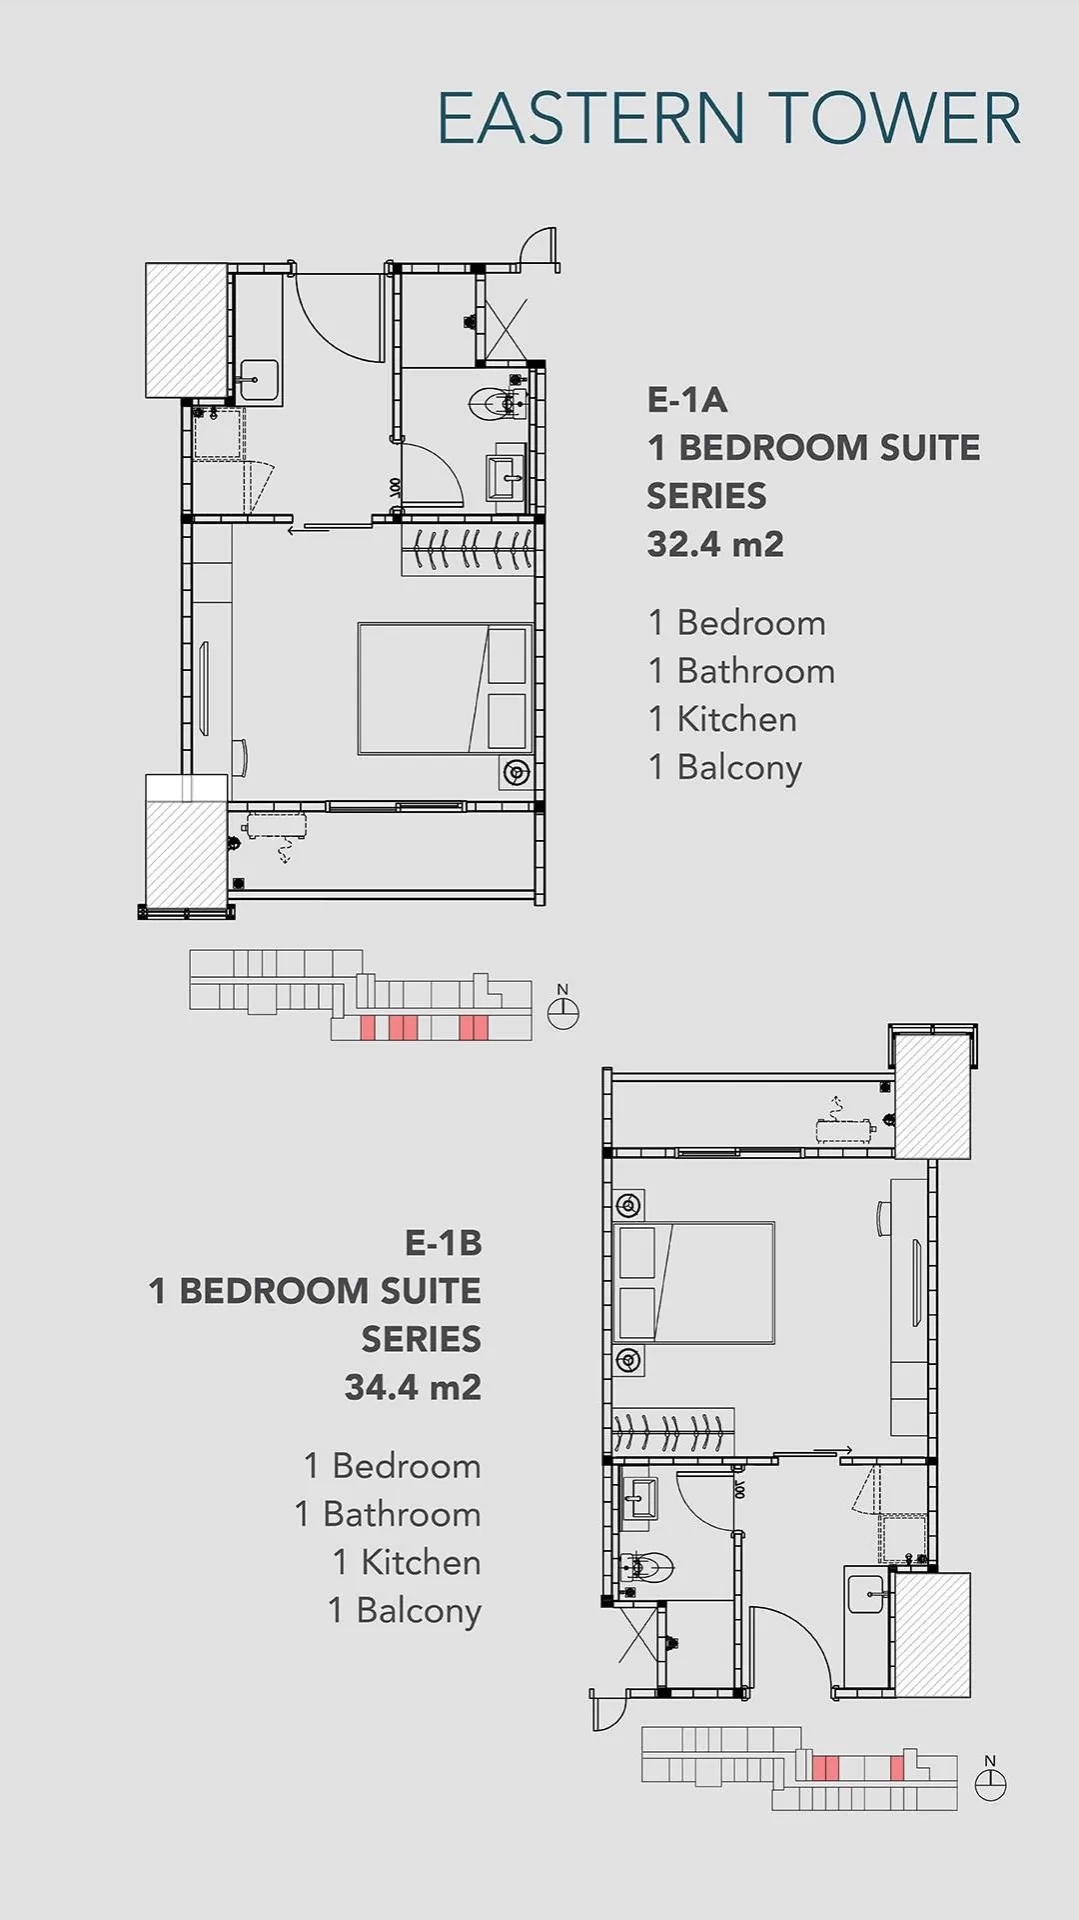 Unit-Type-Eastern-Tower-Embarcadero-Apartment-2